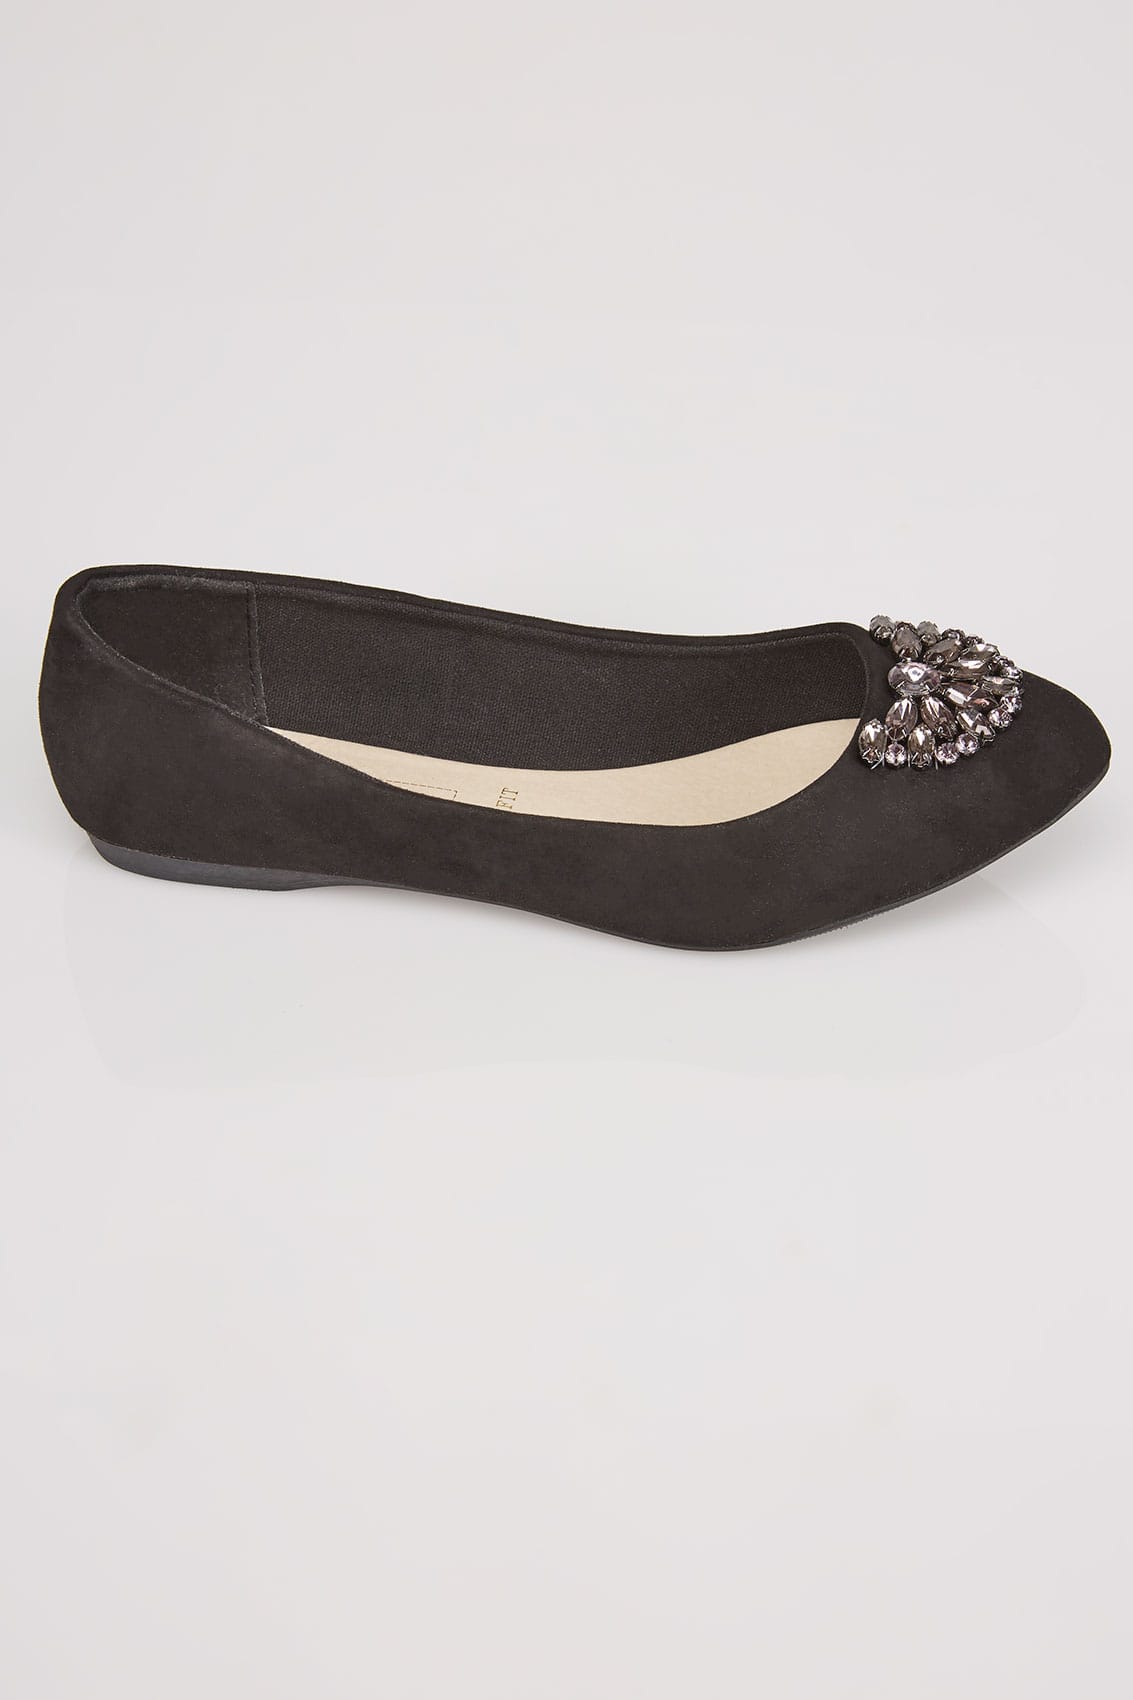 Black Suedette Ballerina Pumps With Jewel Detail In E Fit